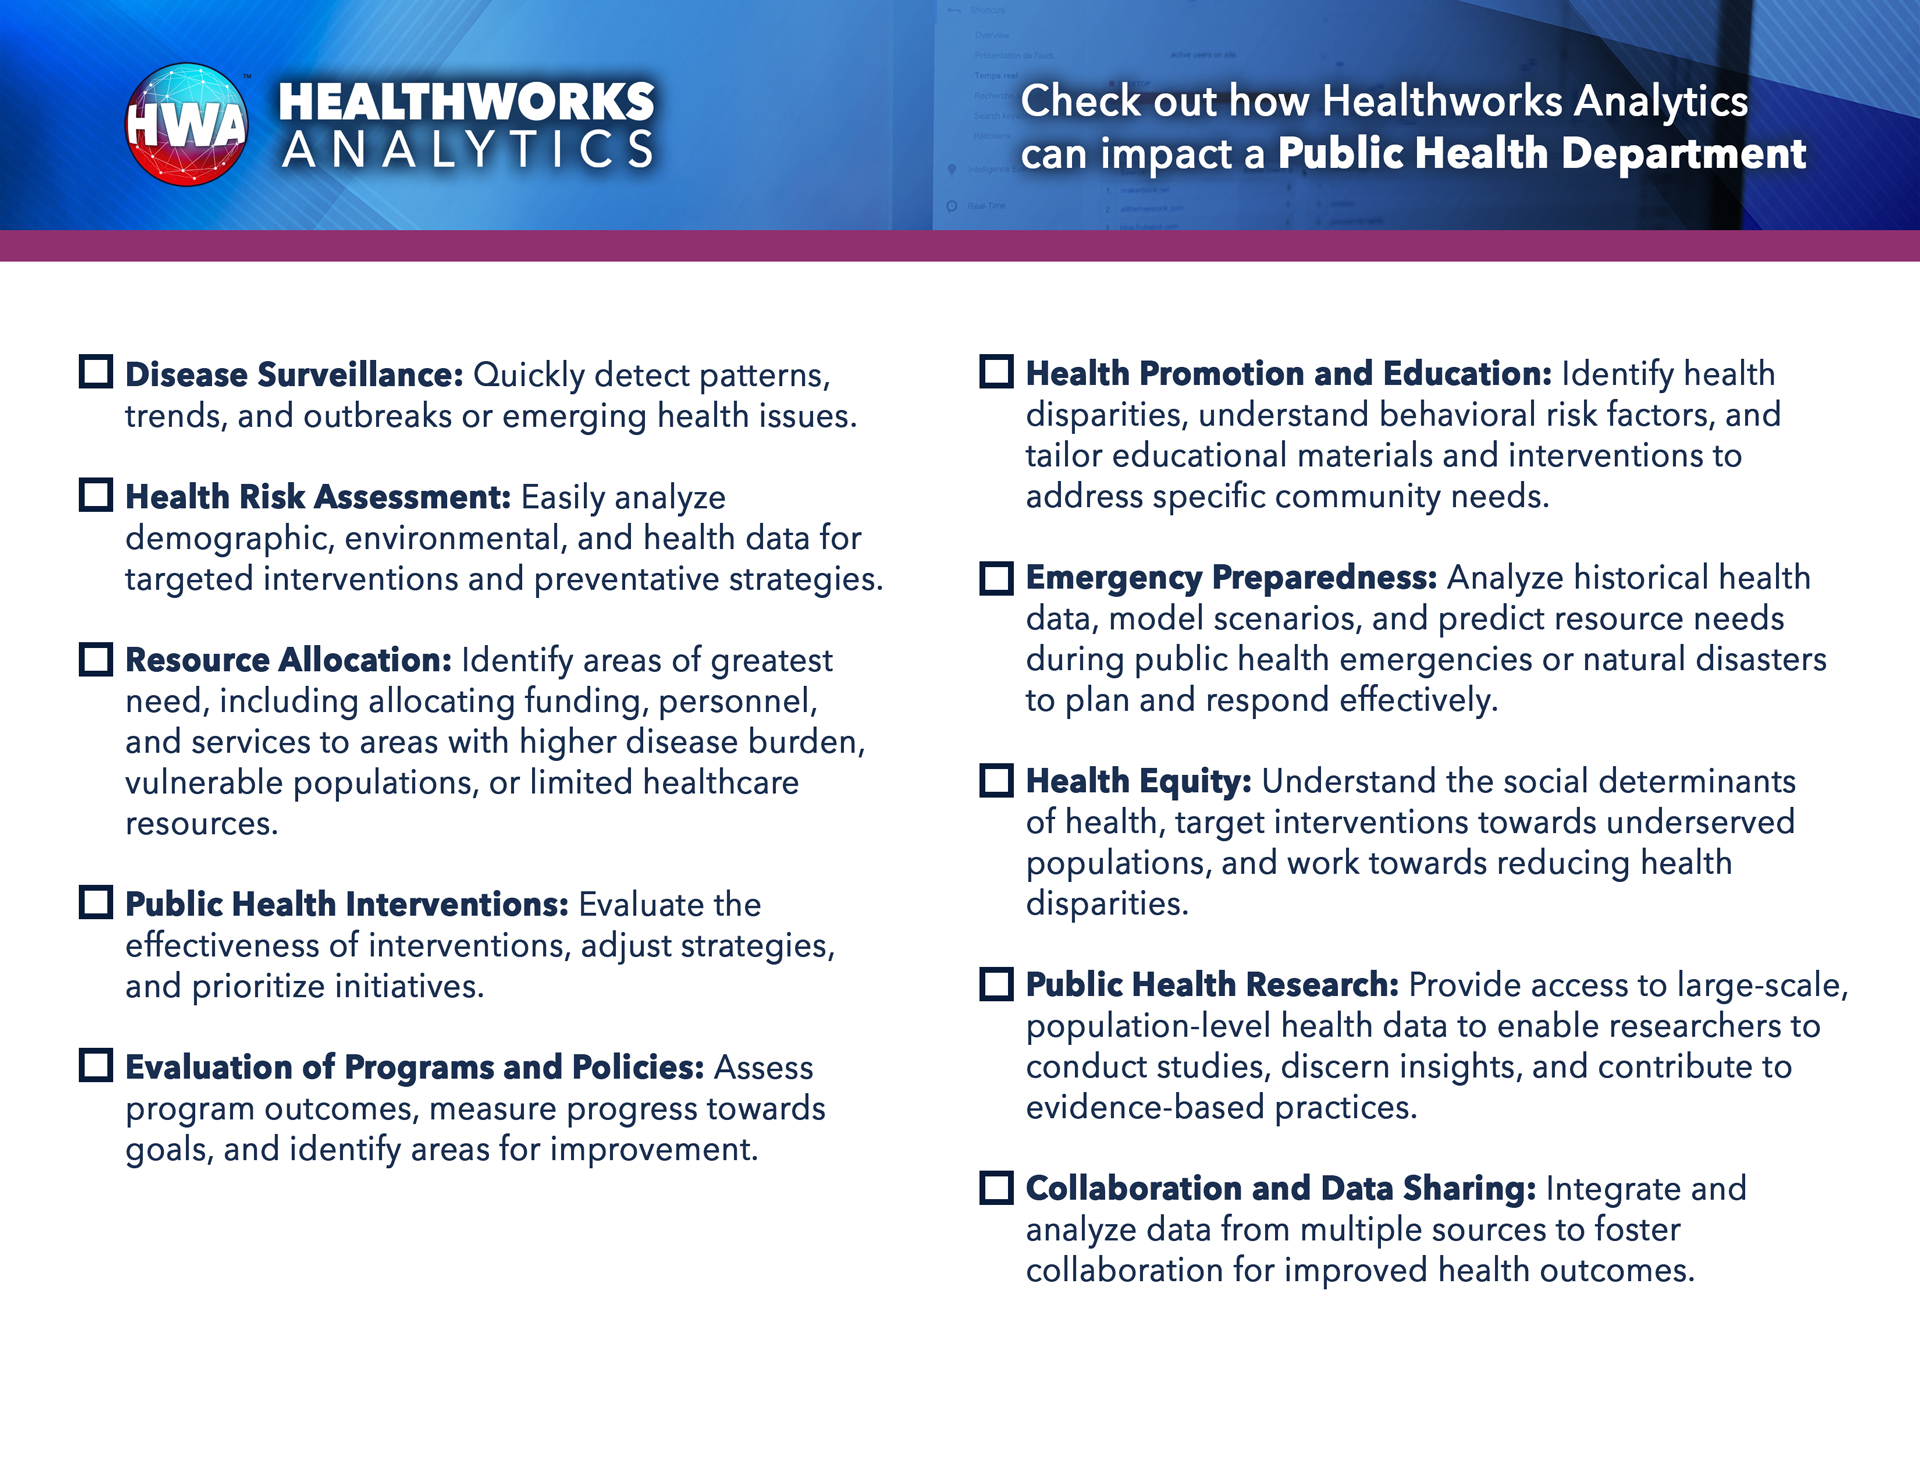 Check-out-how-Healthworks-Analytics-can-impact-Public-Health-Departments---back-v4